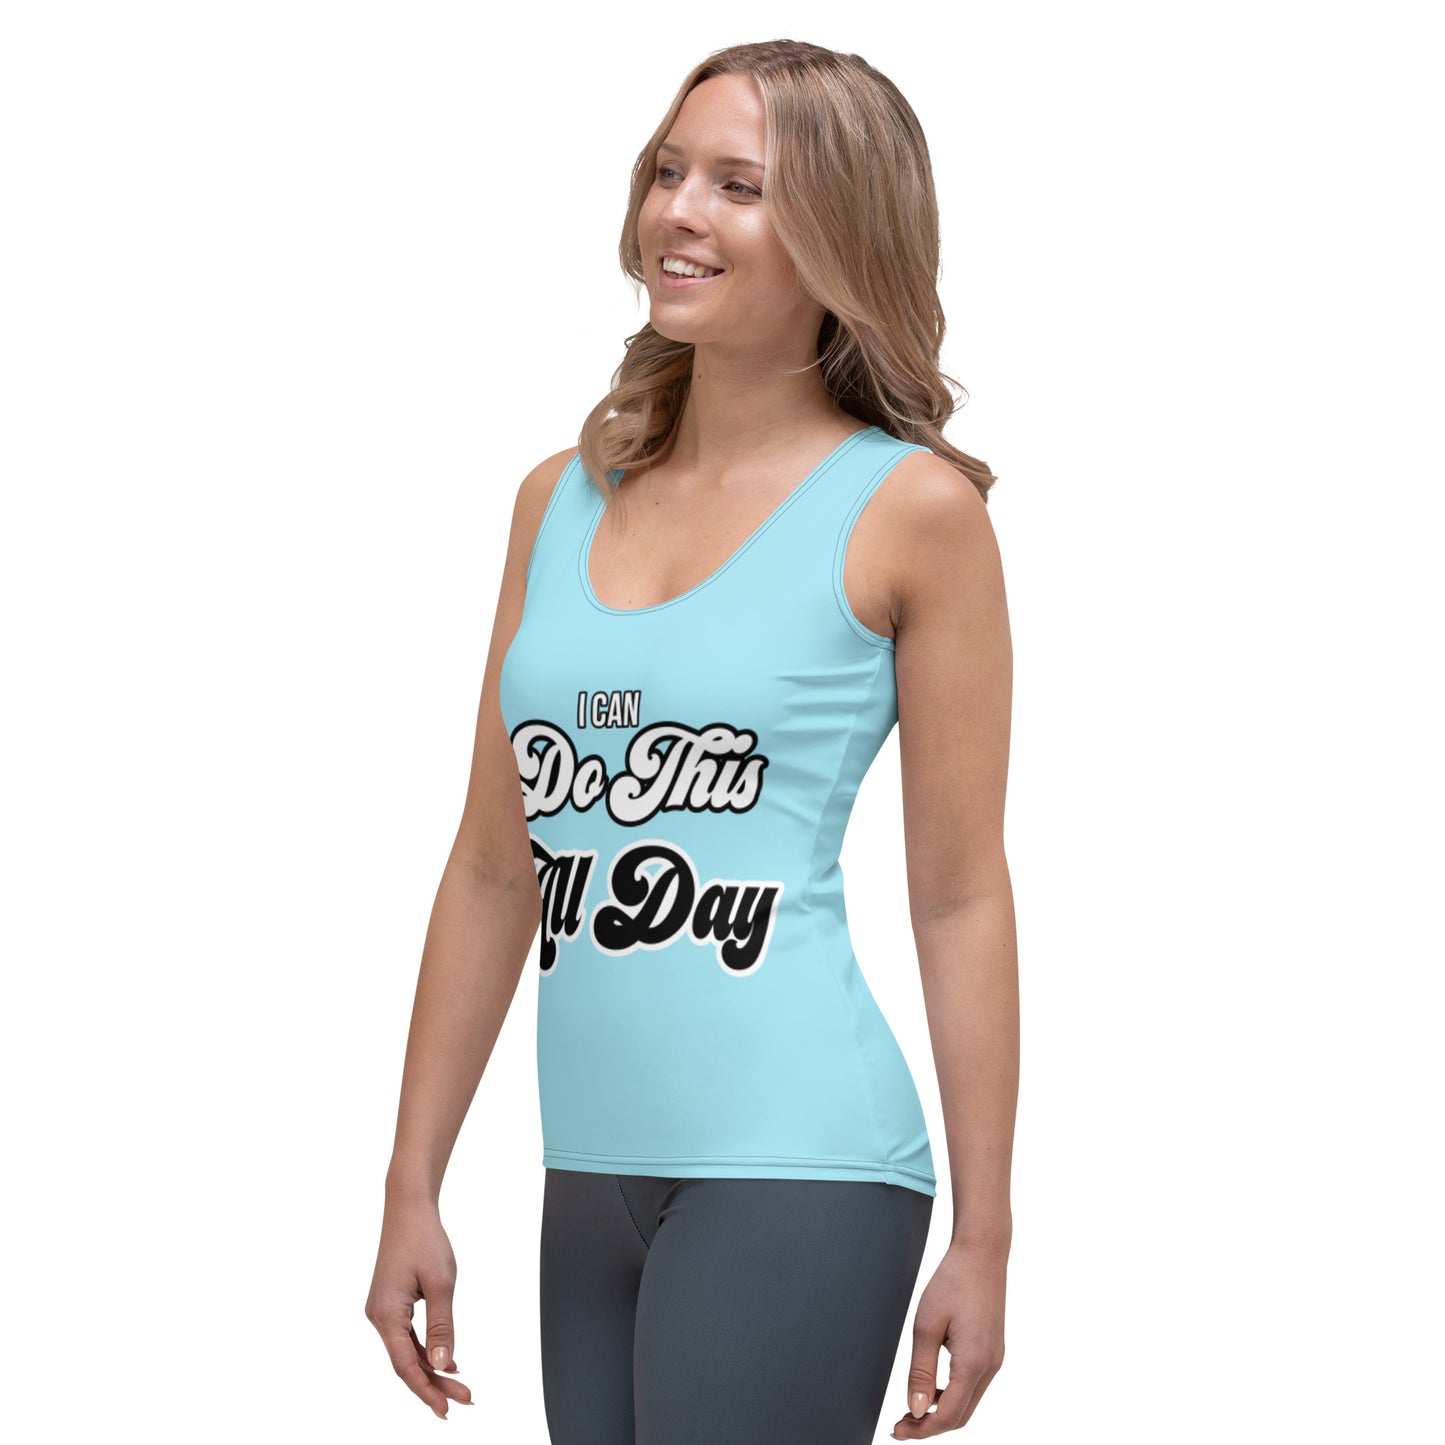 'Do This All Day' Sublimation Cut & Sew Tank Top